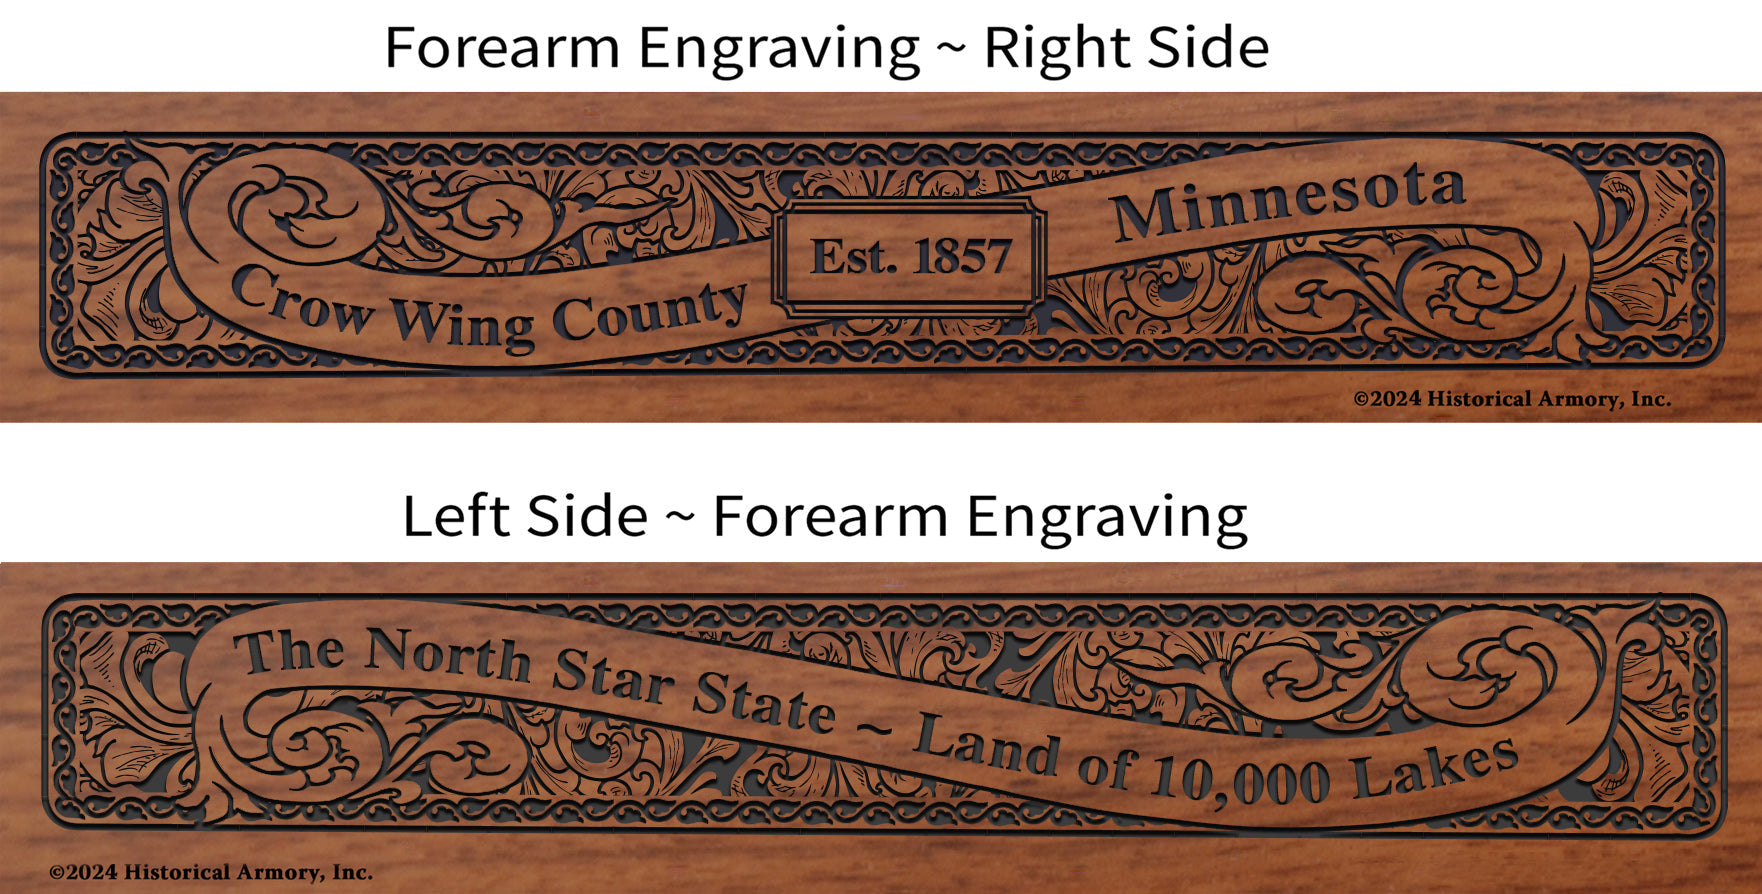 Crow Wing County Minnesota Engraved Rifle Forearm